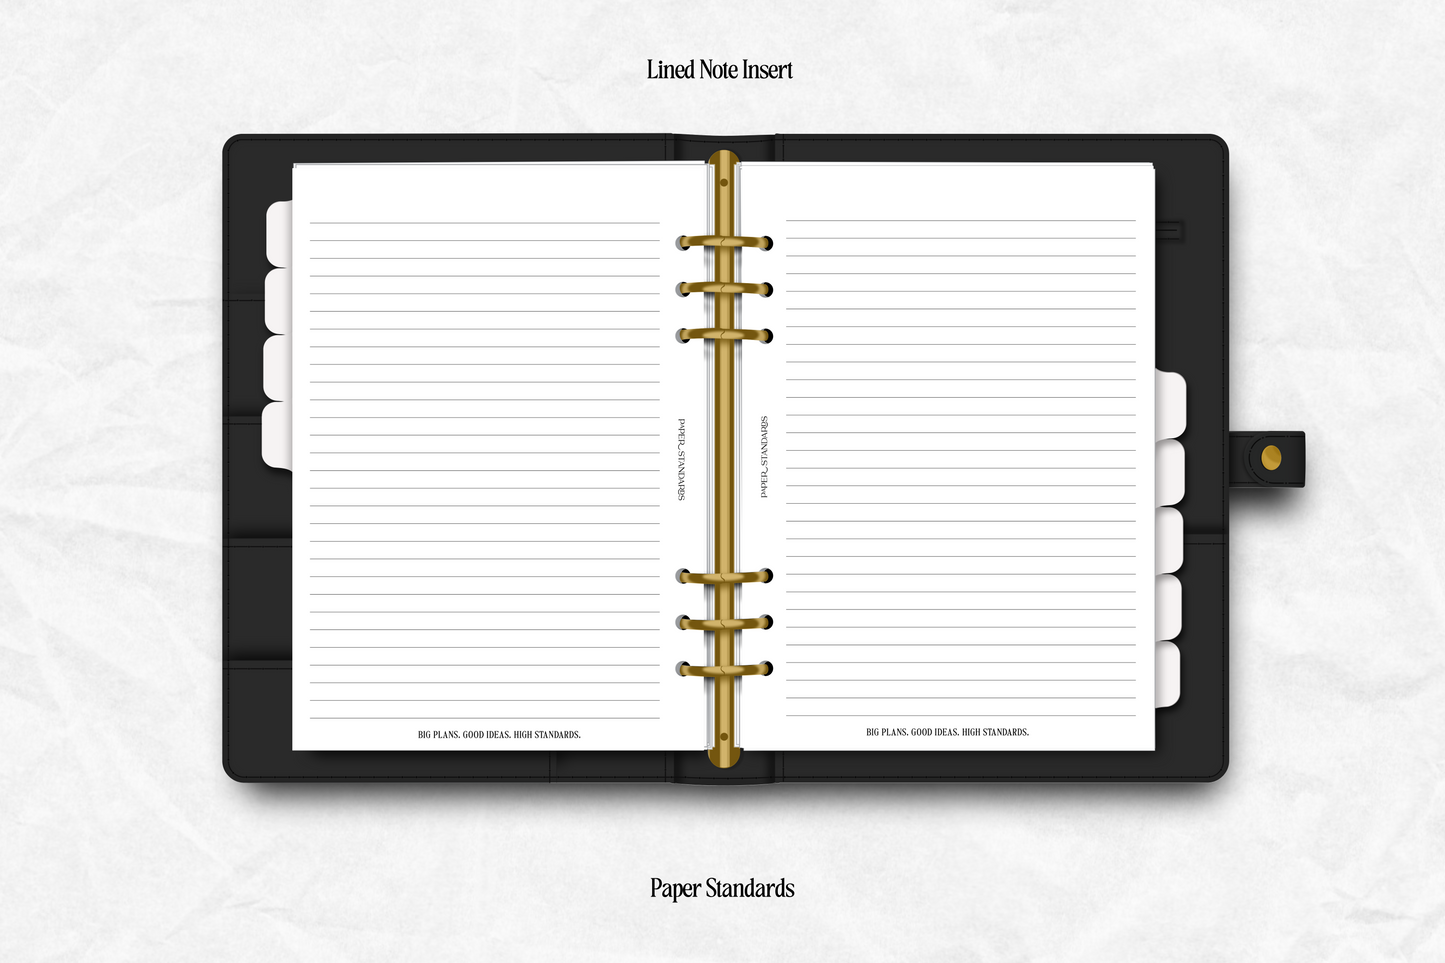 Lined Note Insert – Paper Standards